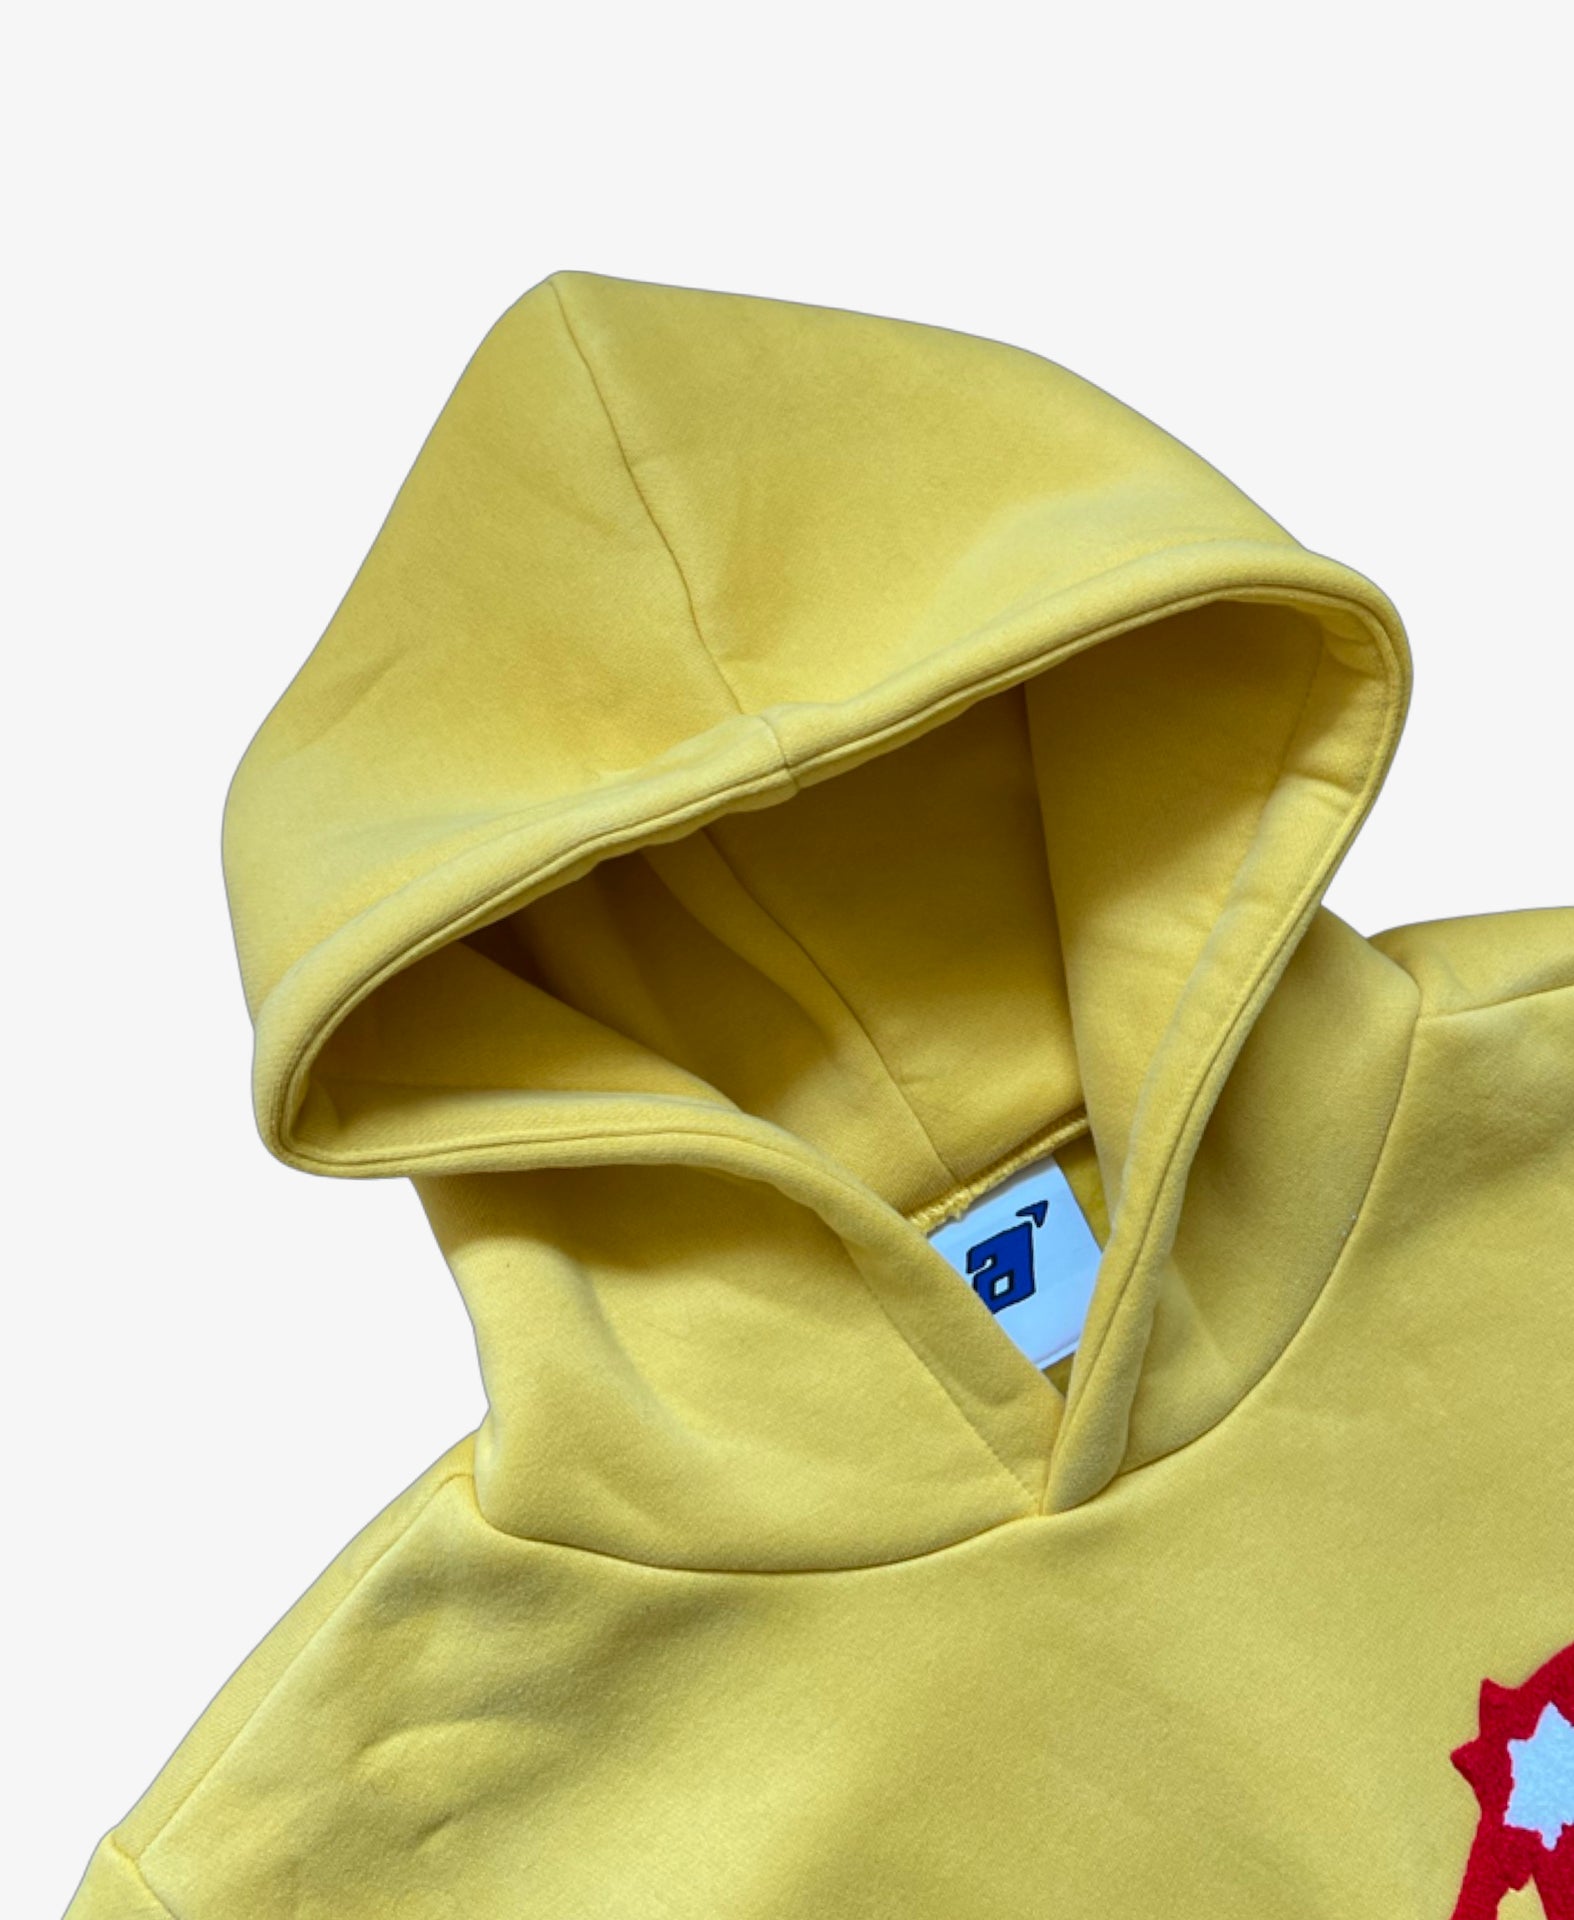 Canvas - Yellow Space Hoodie